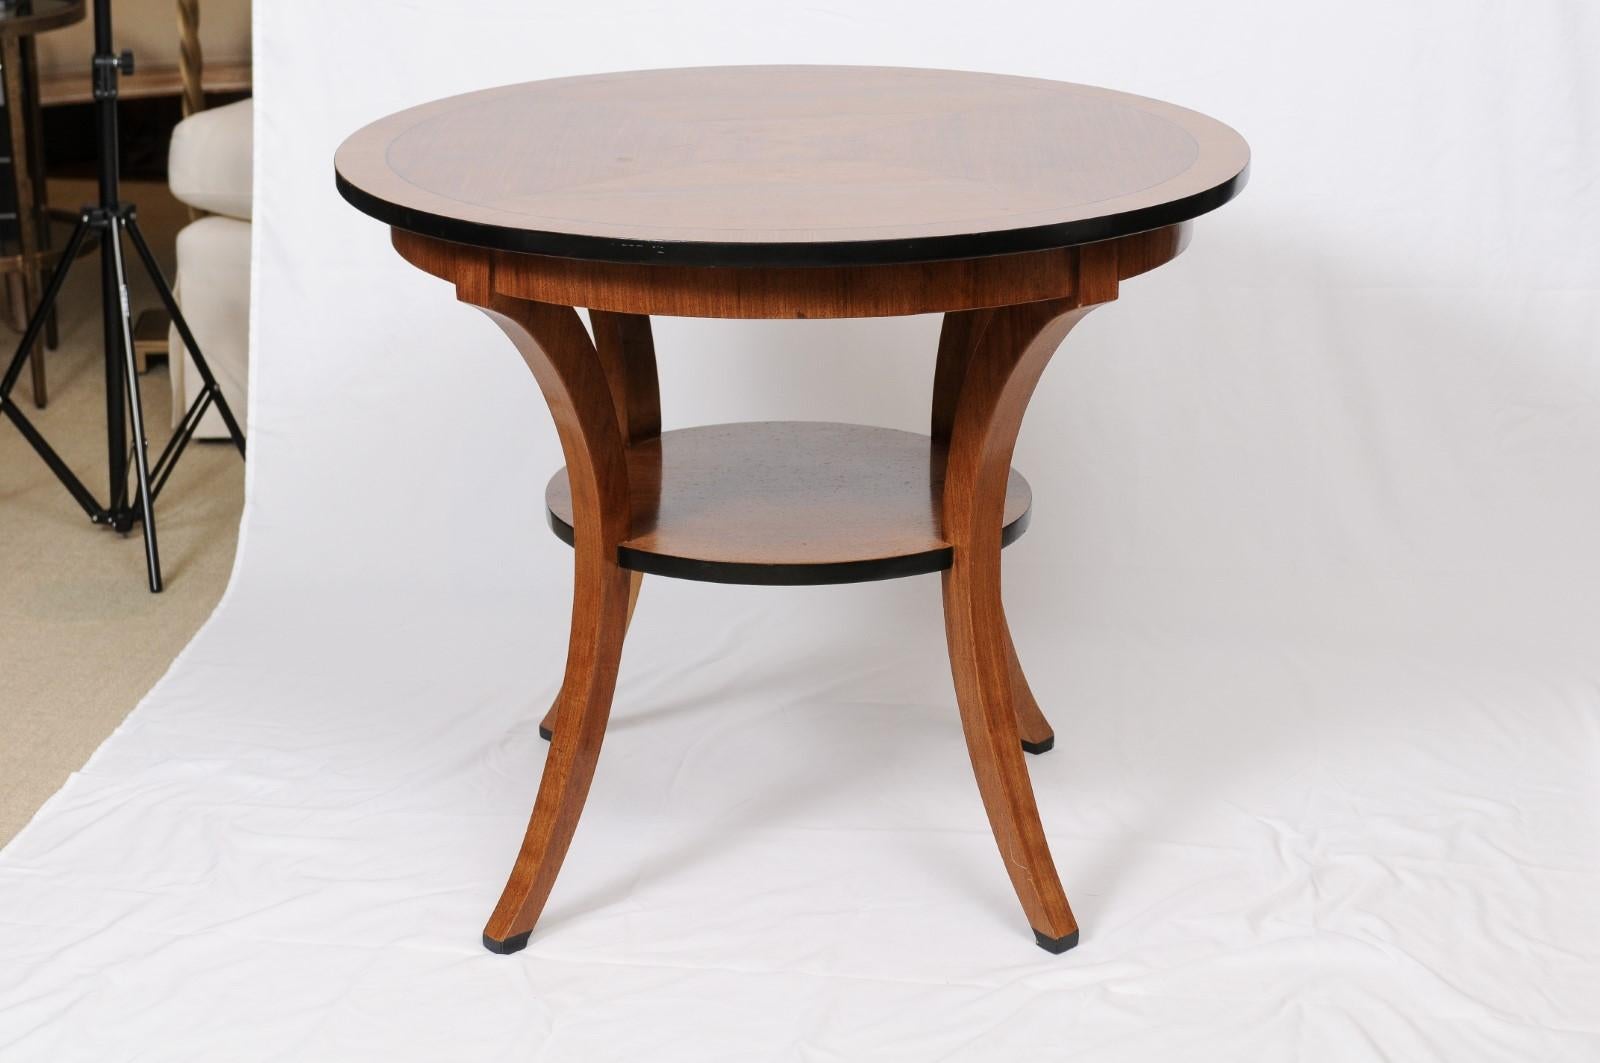 Mahogany round table that could be used for many purposes as a small dining table or an end or side table. An Italian reproduction featuring a veneered top with border, on four cabriole legs with a shelf.